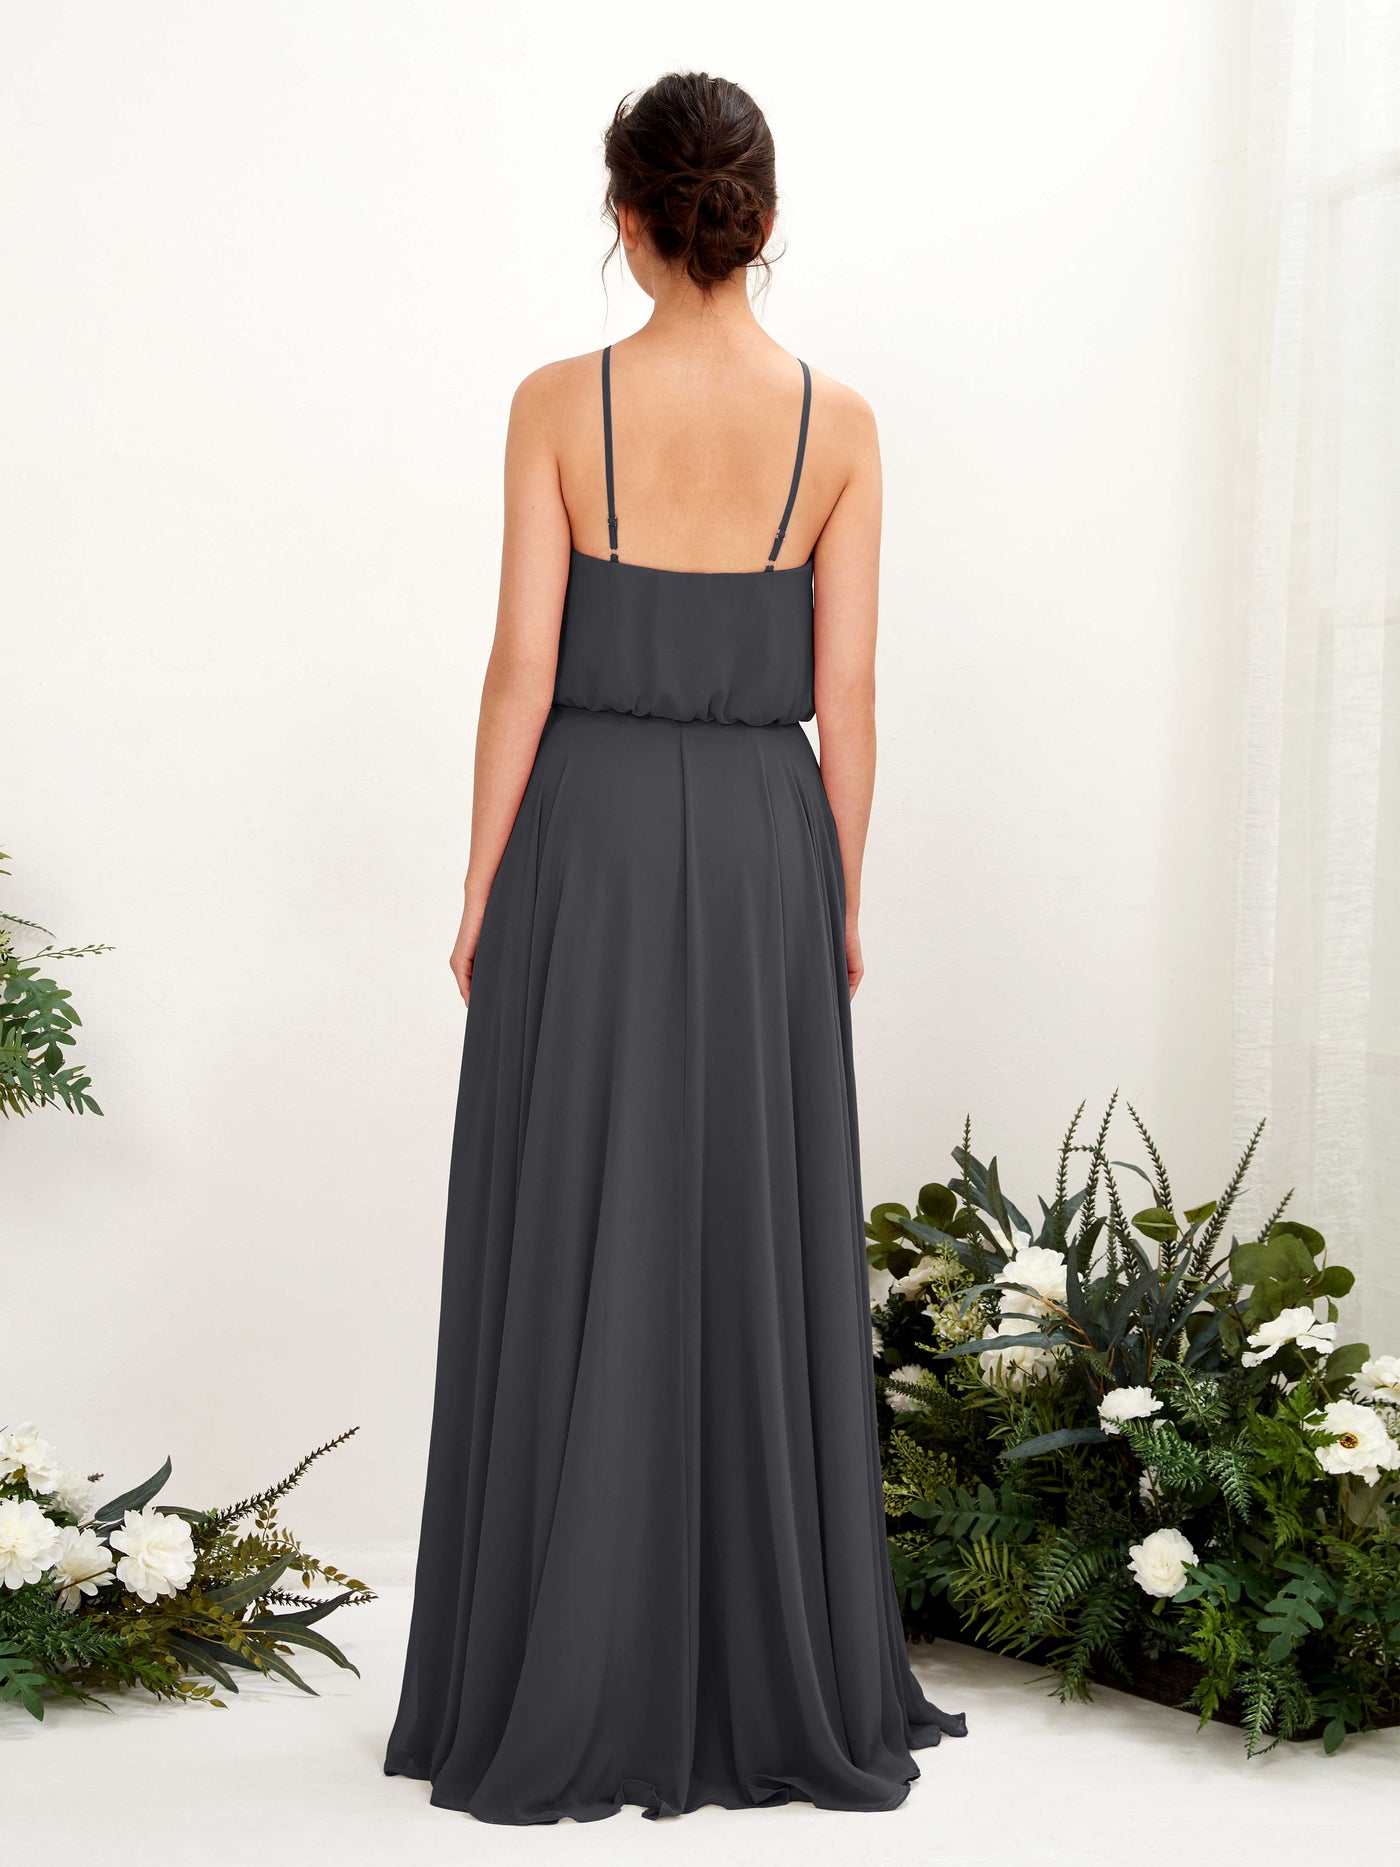 Pewter Bridesmaid Dresses Bridesmaid Dress Ball Gown Chiffon Halter Full Length Sleeveless Wedding Party Dress (81223438)#color_pewter